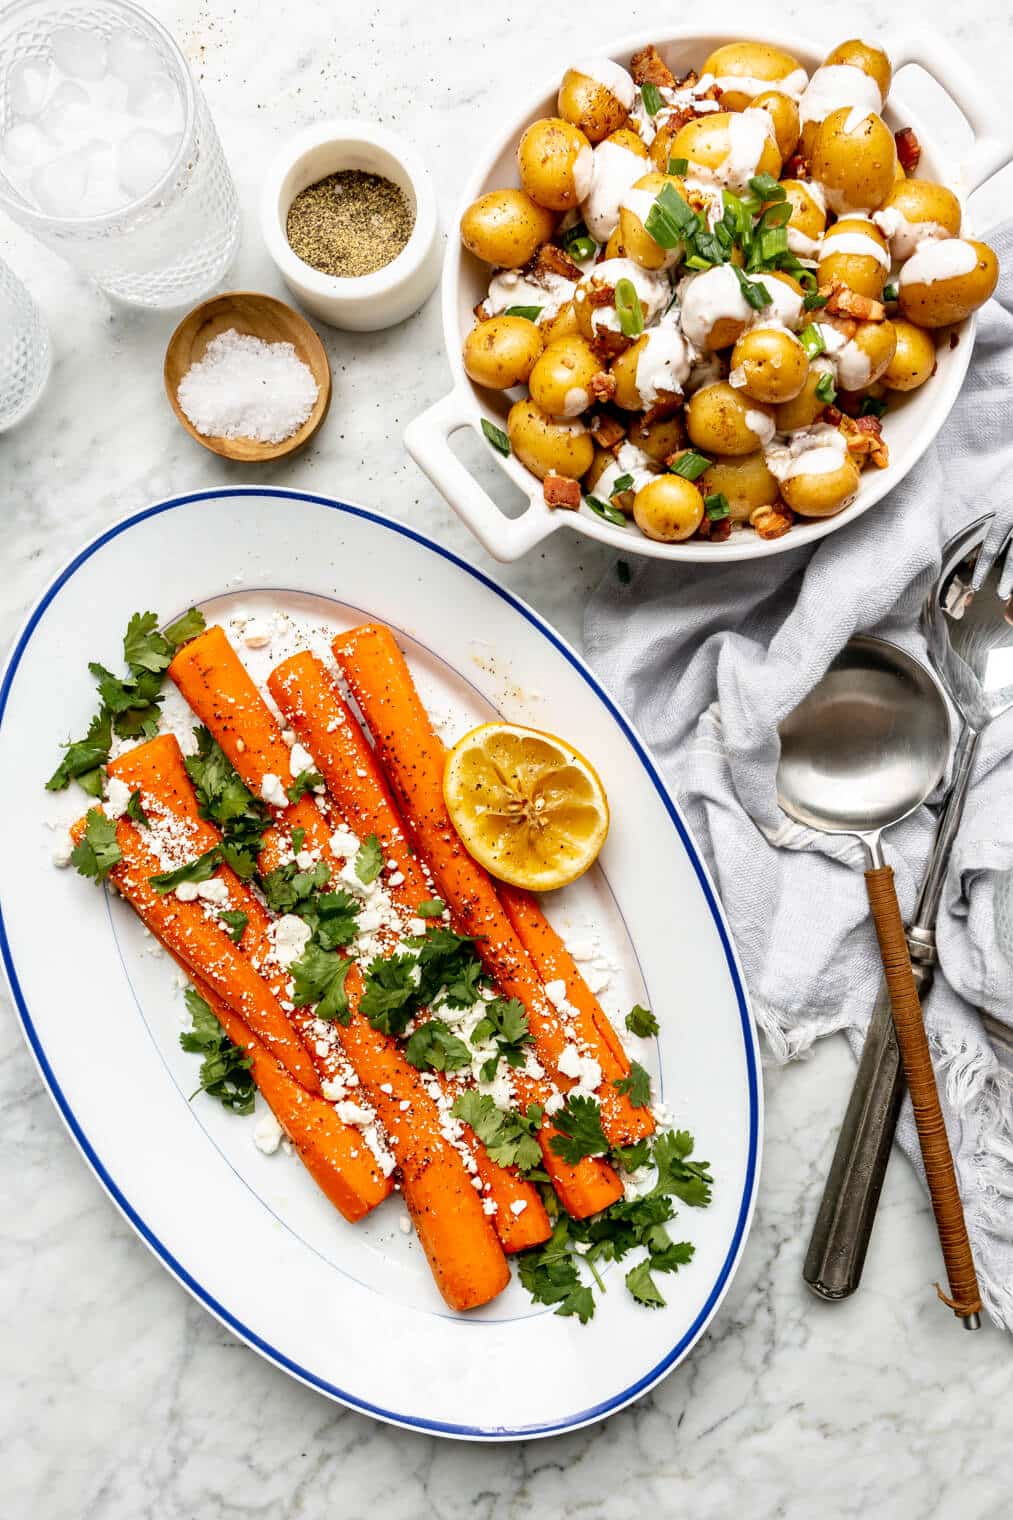 Full carrots plated on a white oval serving dish with a blue rim garnished with cilantro and goat cheese crumbles and a squeeze lemon half. Next to that dish is a bowl of roasted Yukon gold potatoes drizzled with a cream and topped with bacon and herbs. A small bowl of flaky sea salt and ground pepper are also on the table along with serving utensils.